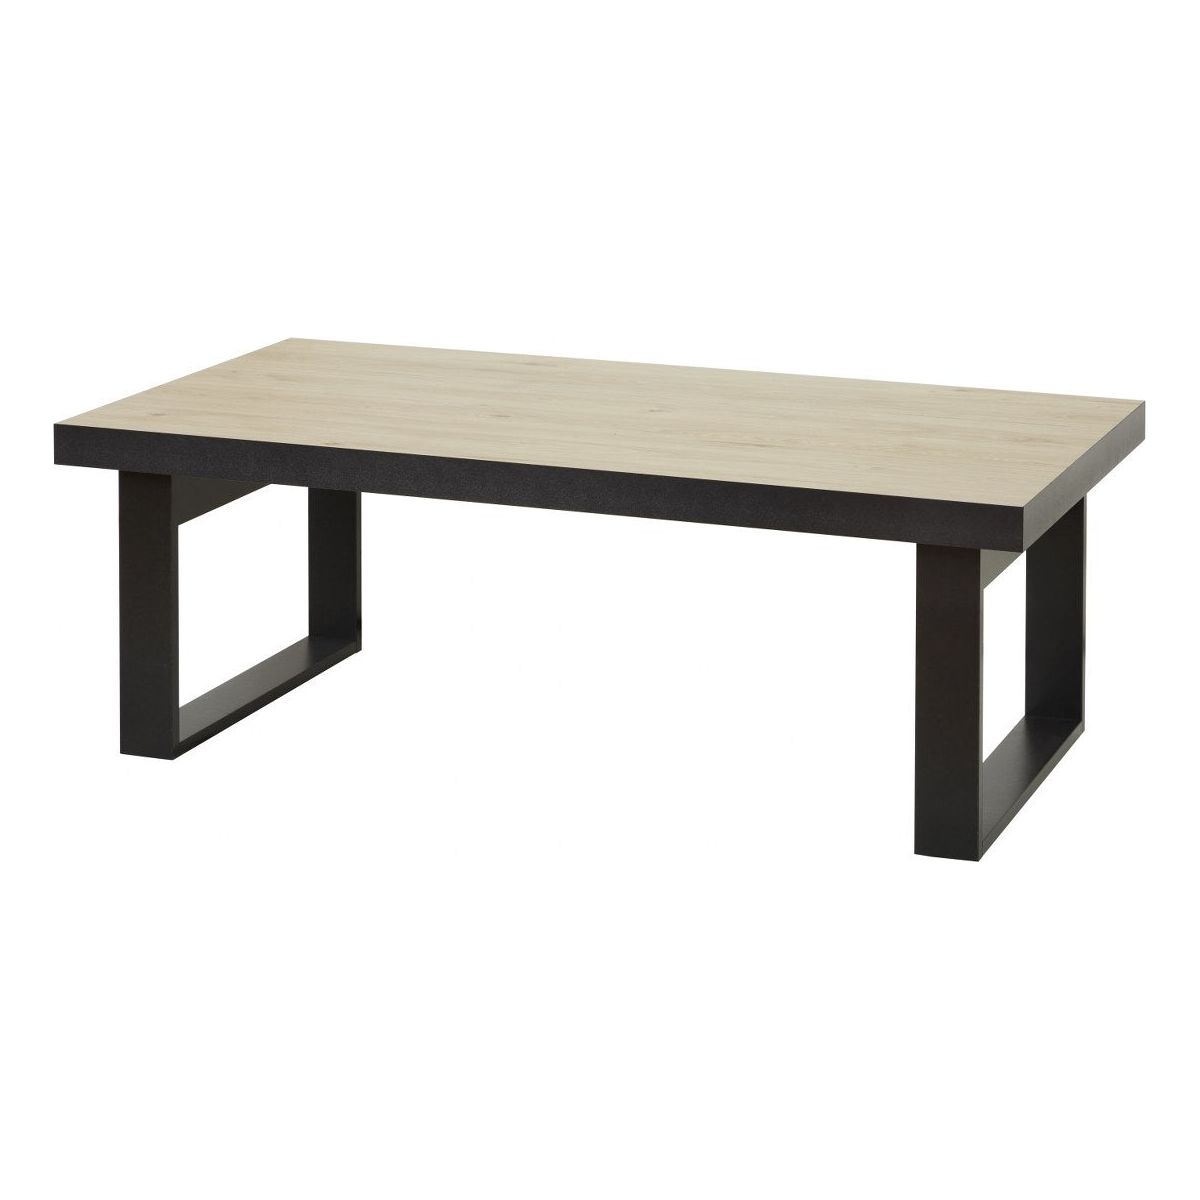 Coffee table | Furniture series Tilly | brown, natural, black | 130